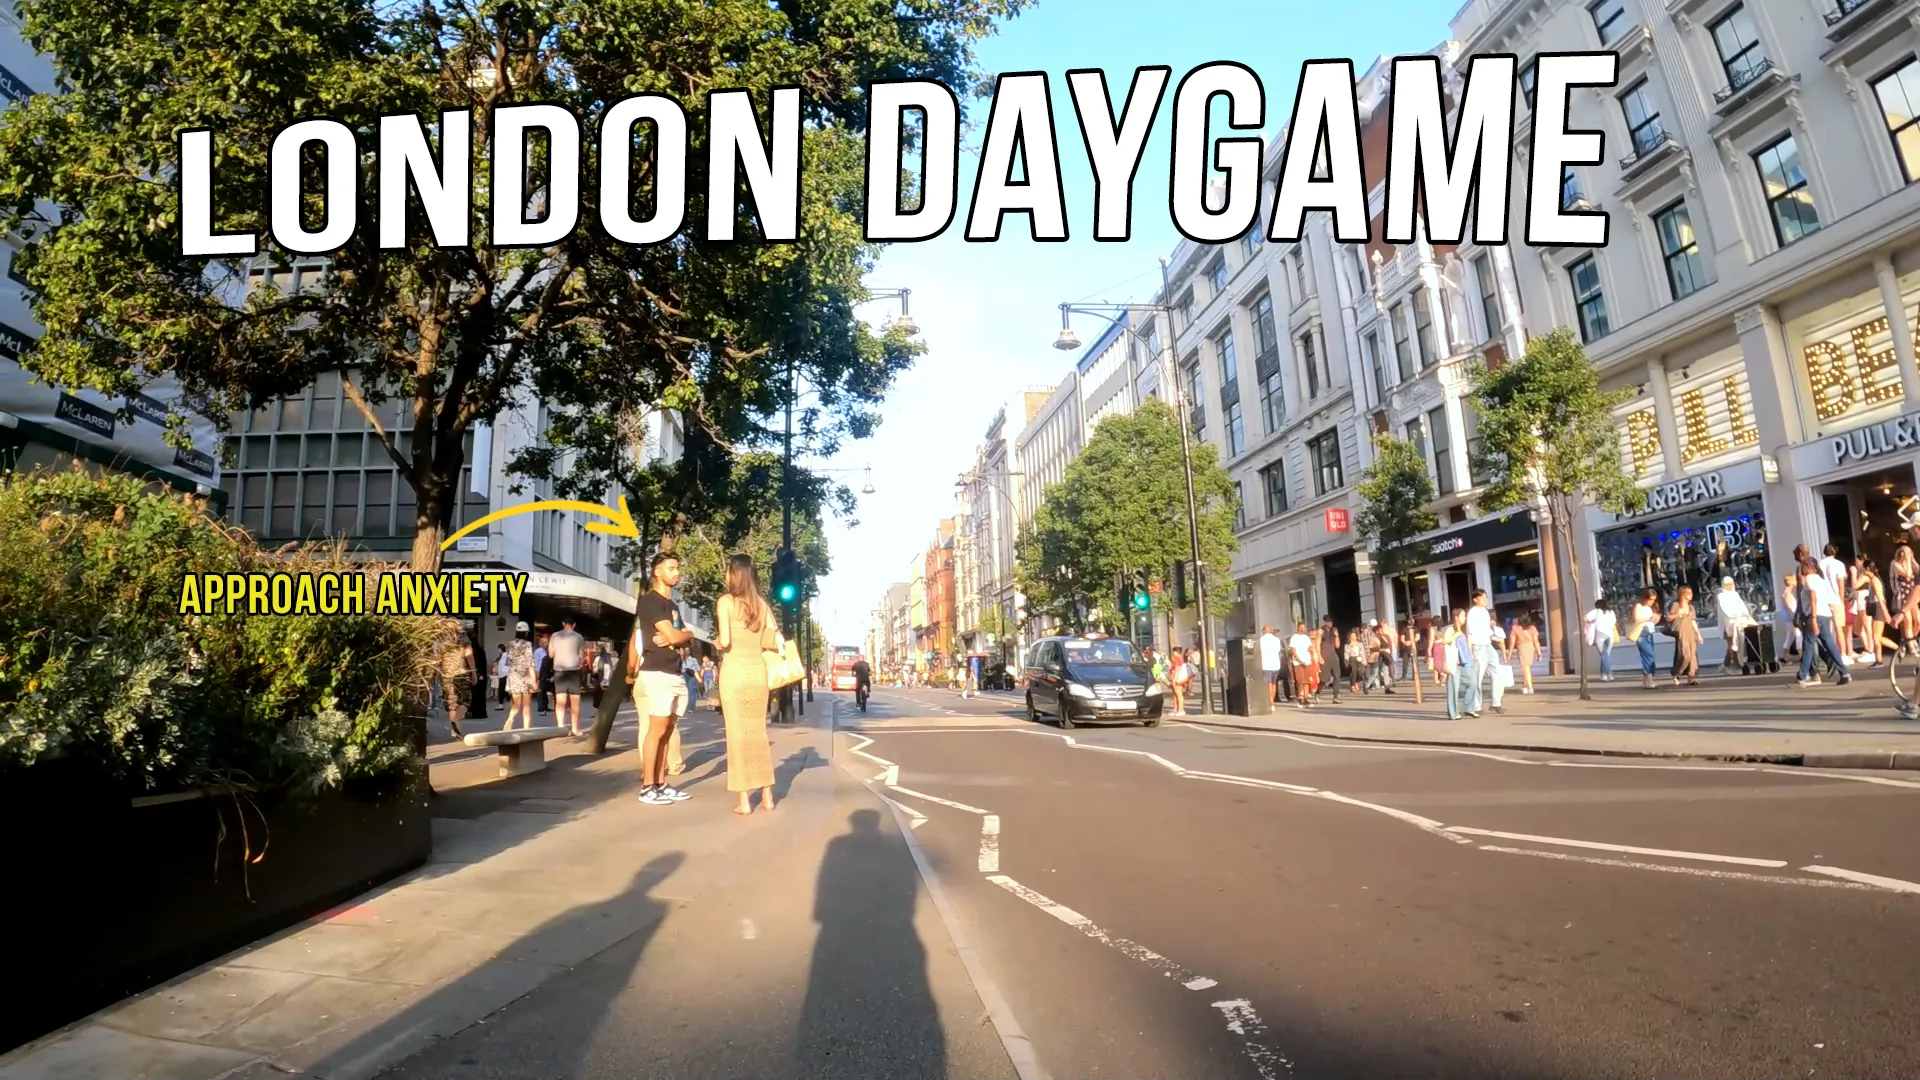 LONDON DAYGAME: DEALING WITH APPROACH ANXIETY